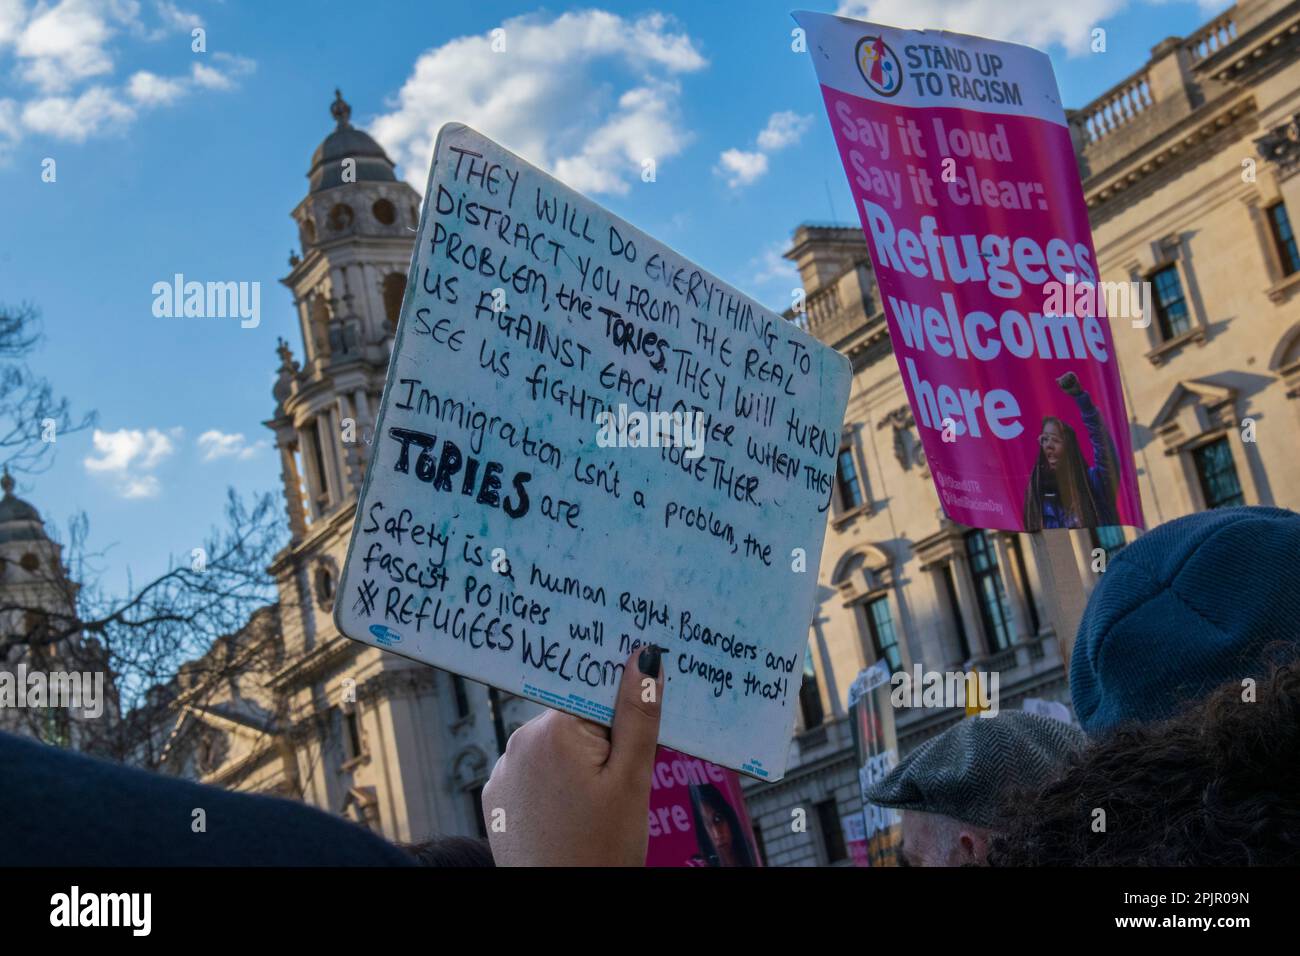 Protesters gather outside Westminster Square in opposition to the Illegal Migration Bill, groups oppose the bill and want refugees to feel welcome. Stock Photo